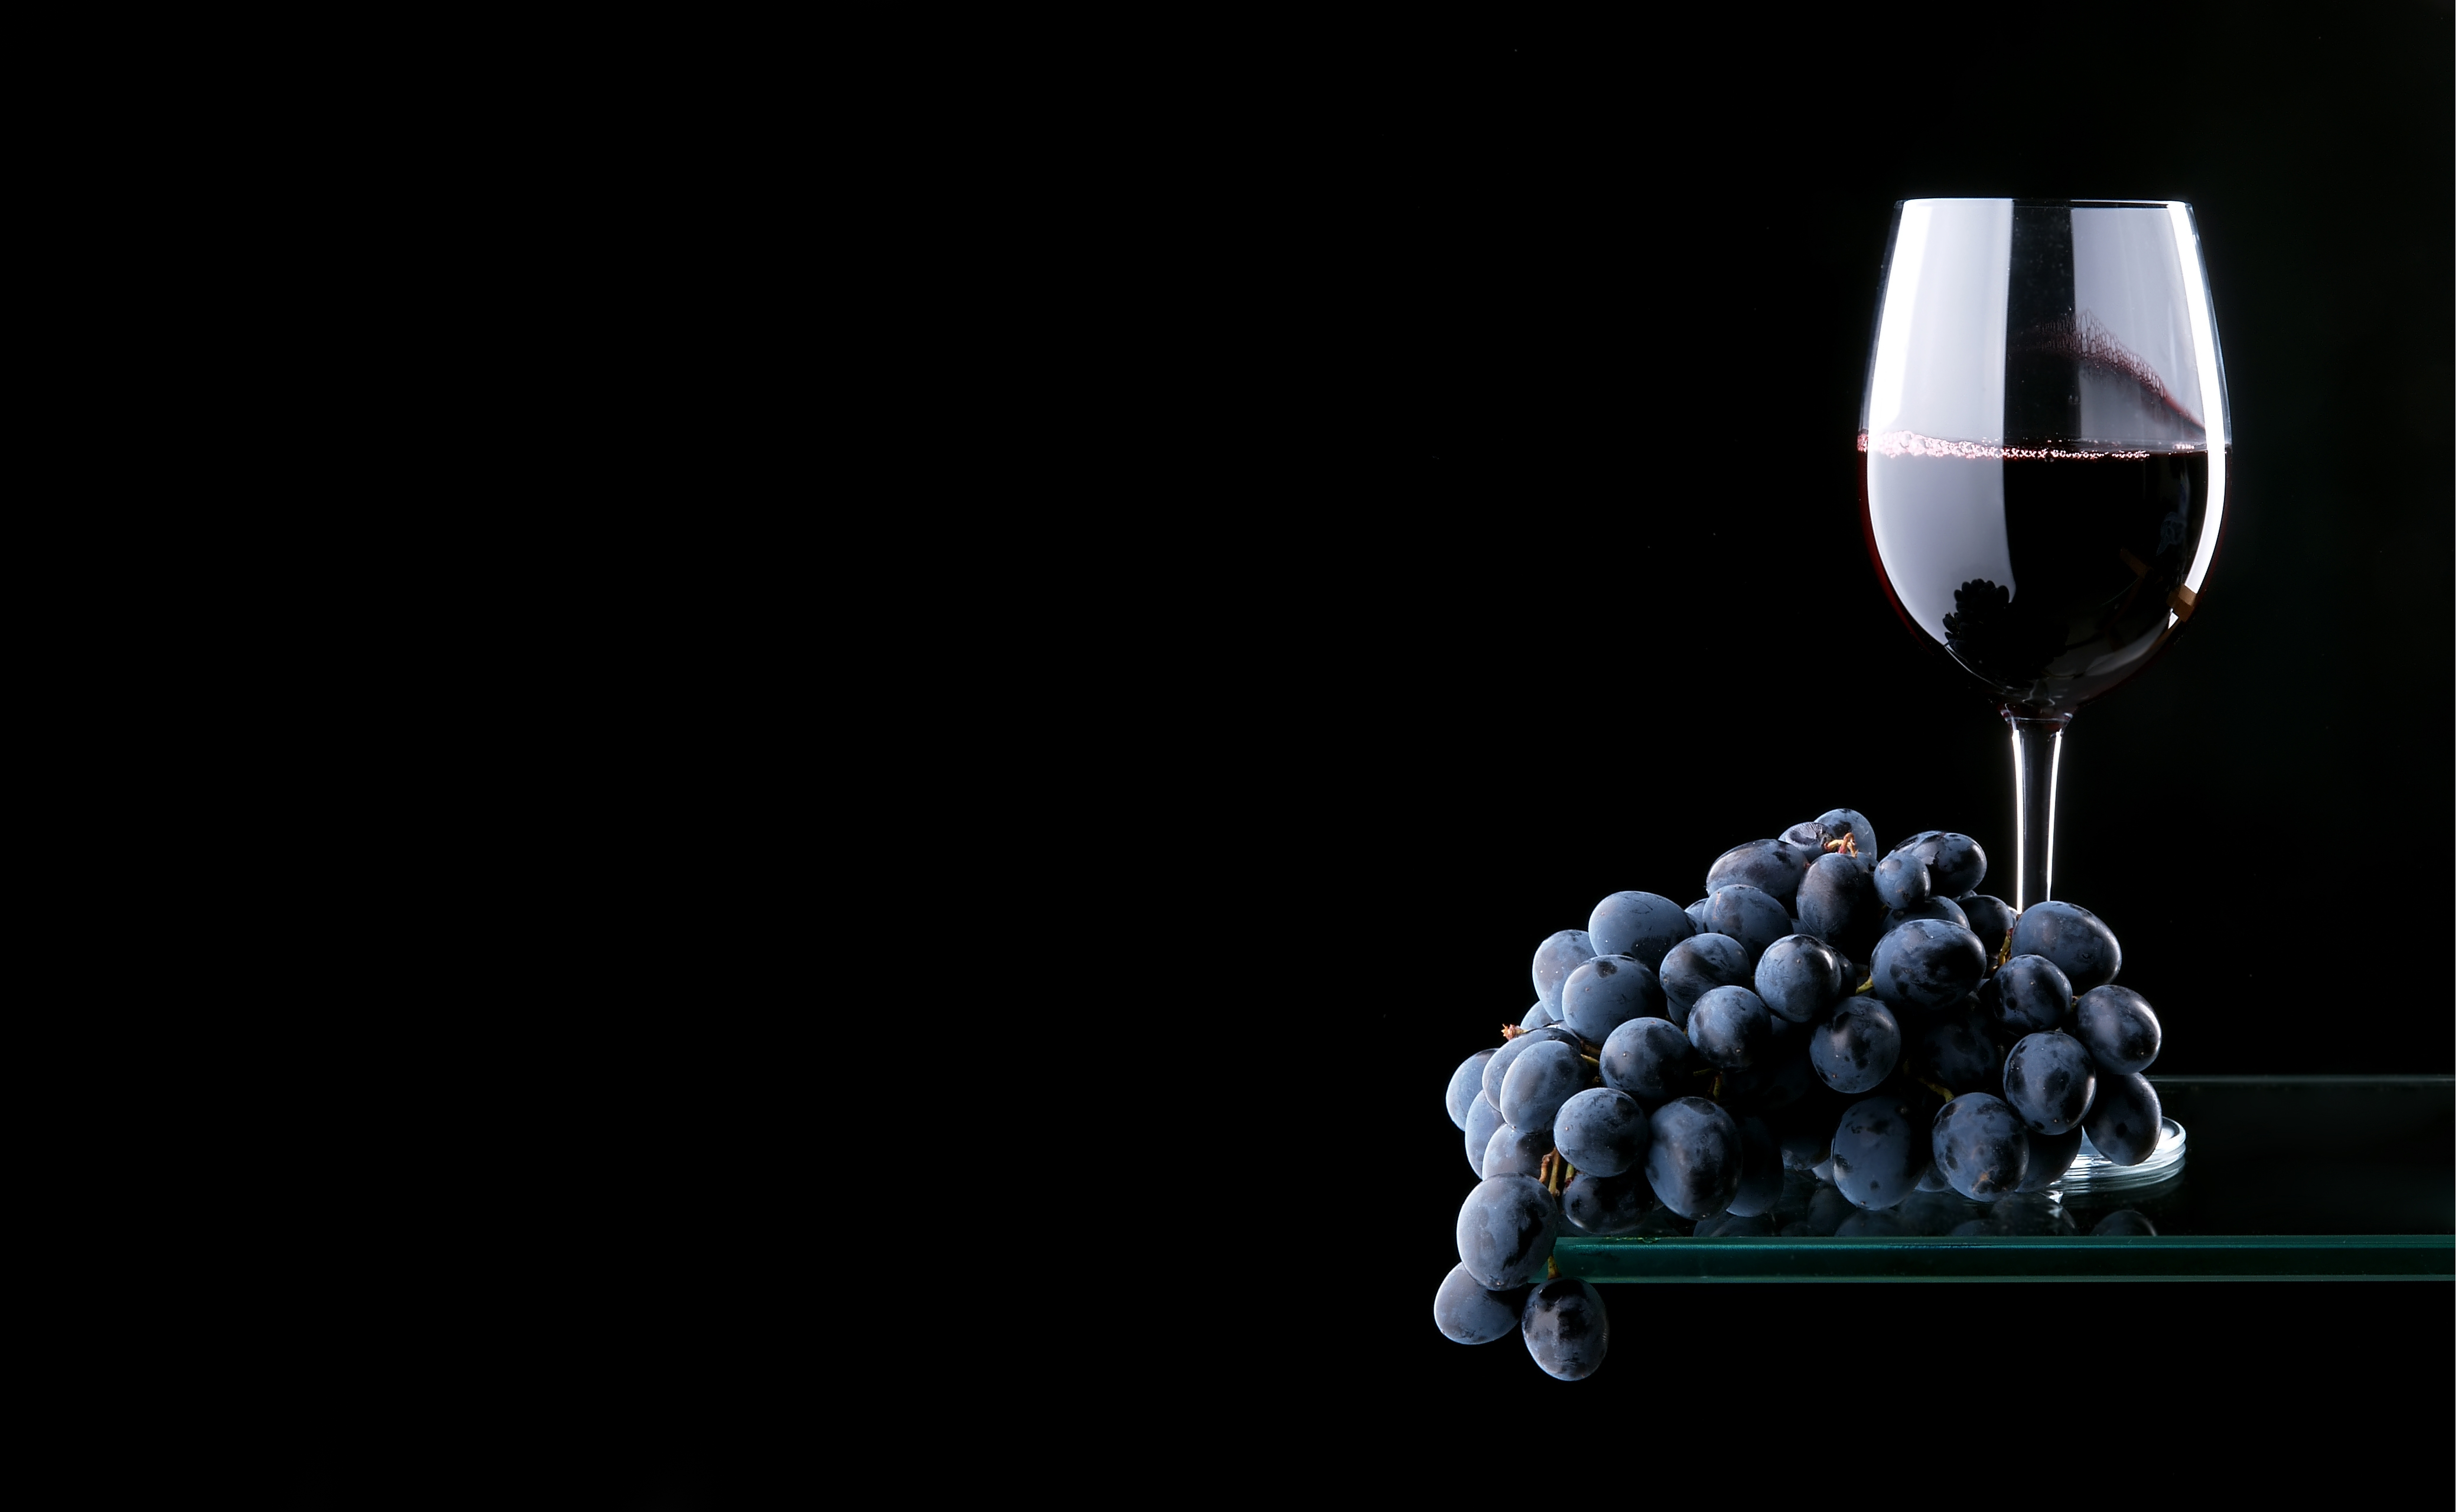 Black Background Grapes Wine Wallpapers And Images HD Wallpapers Download Free Images Wallpaper [wallpaper981.blogspot.com]